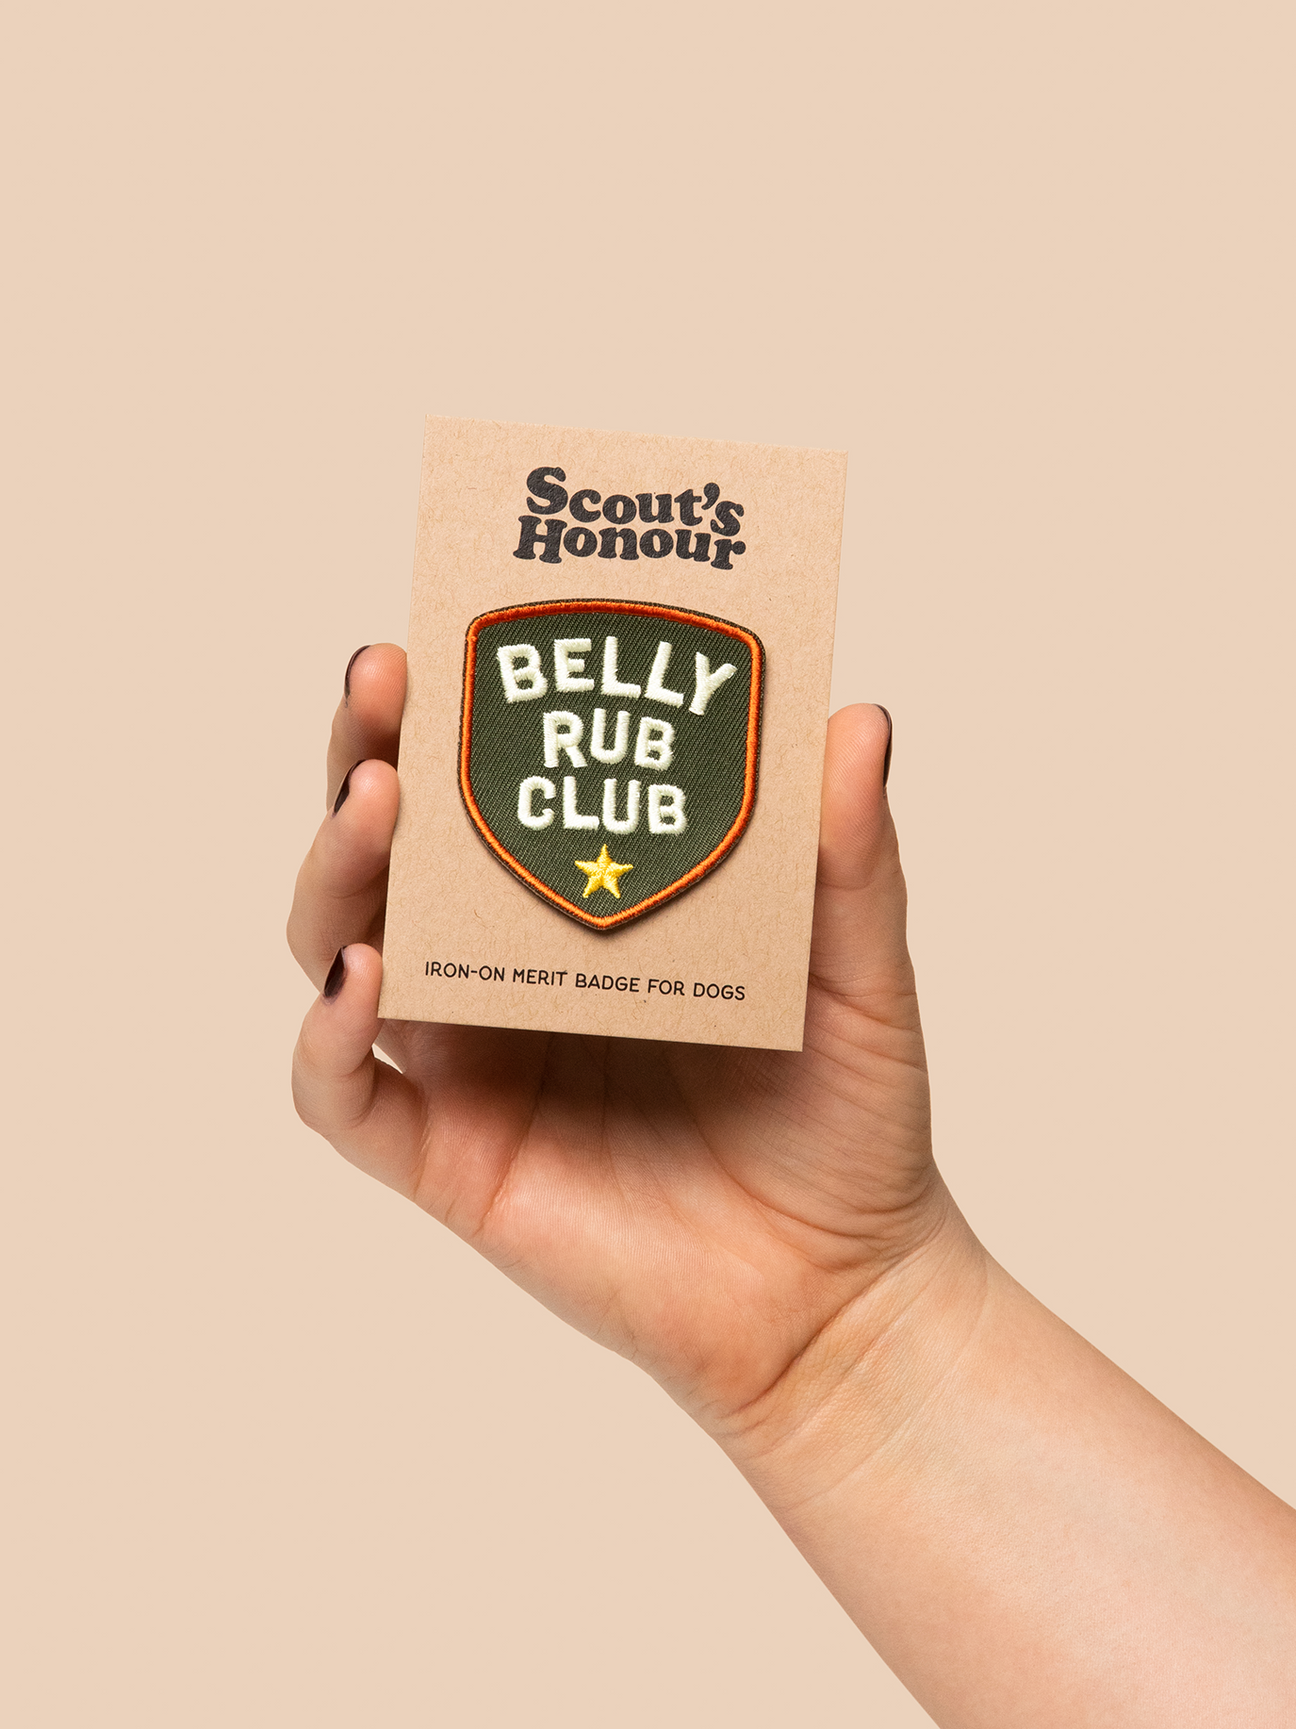 Scout's Honour "Belly Rub Club" Iron-On Patch - Henlo Pets